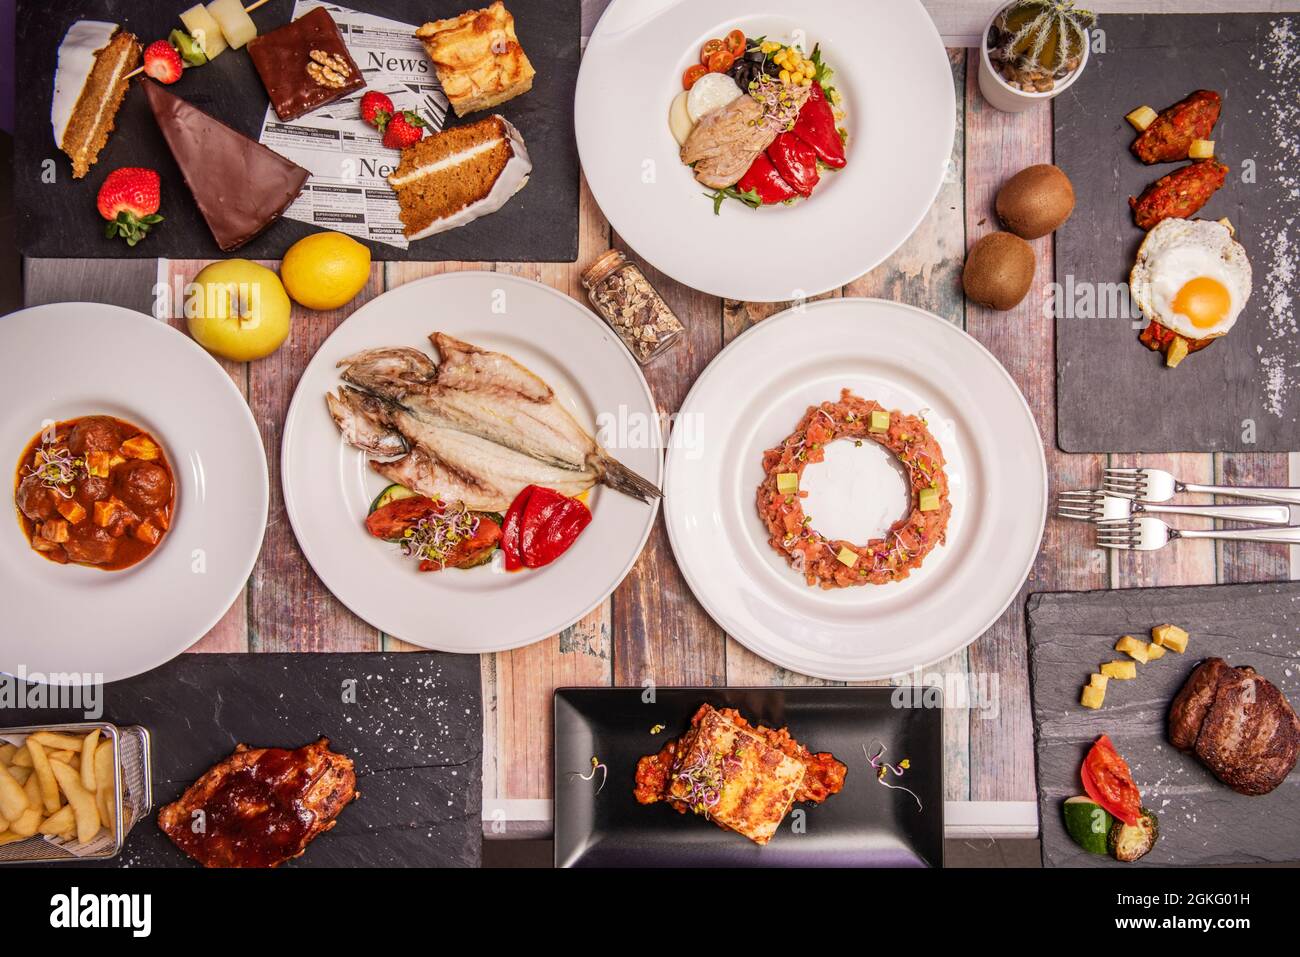 Top view image of a delicious dish of Spanish food, grilled gilthead bream, pork cheek, chicken wings with fried egg, salmon tartare, belly salad and Stock Photo